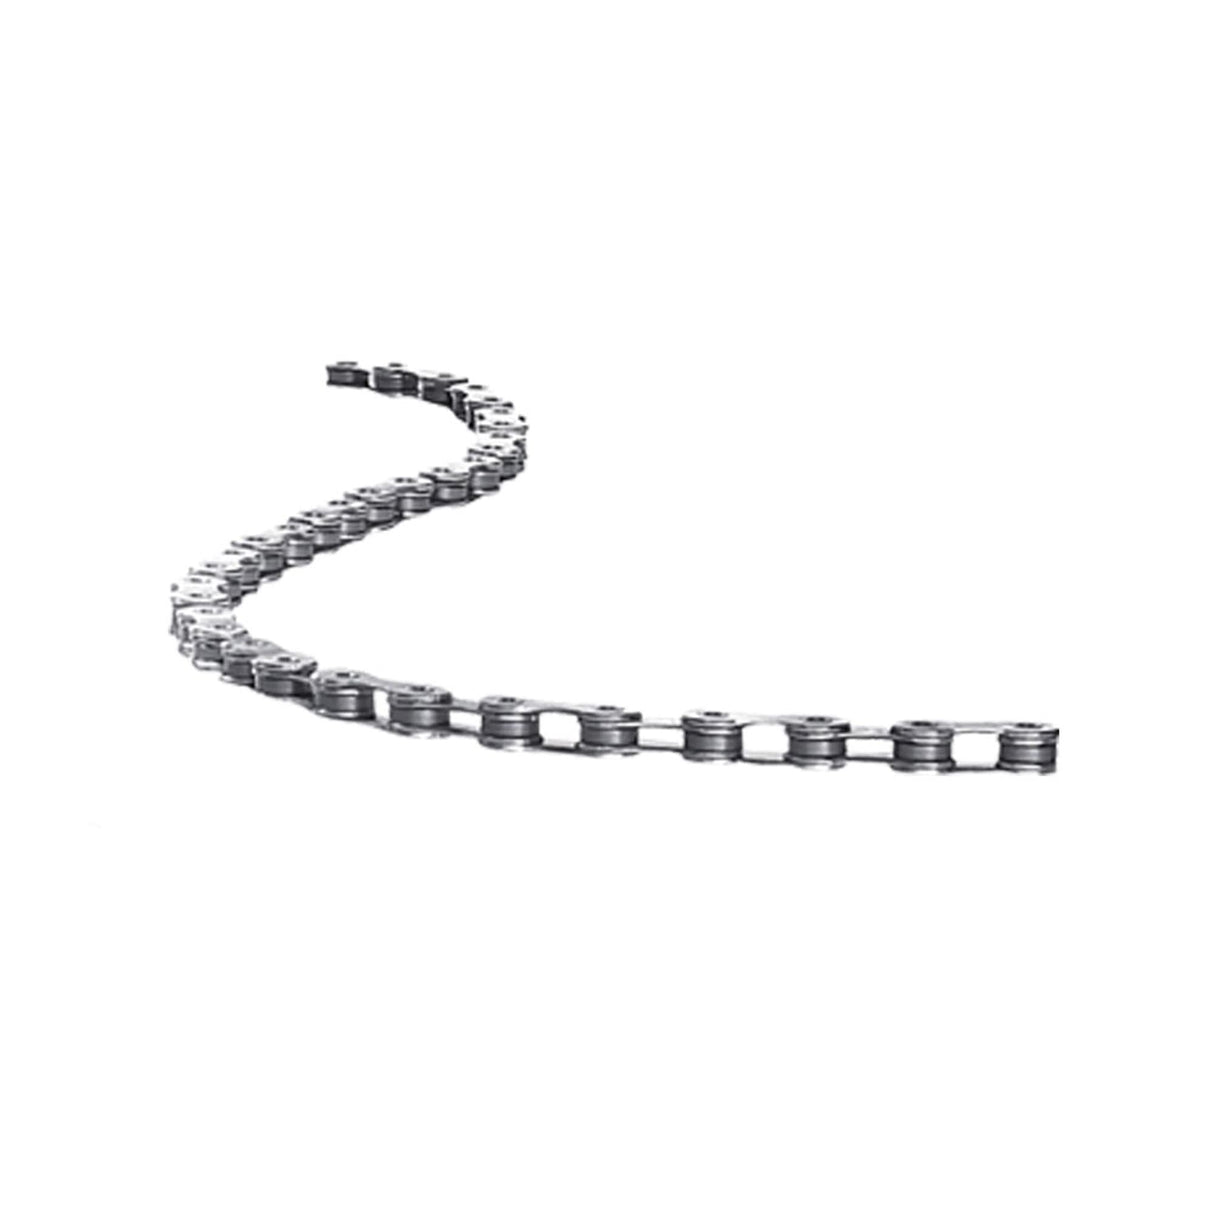 Sram Pc1170 Hollow Pin 11 Speed Chain With Powerlock: Silver 114 Links